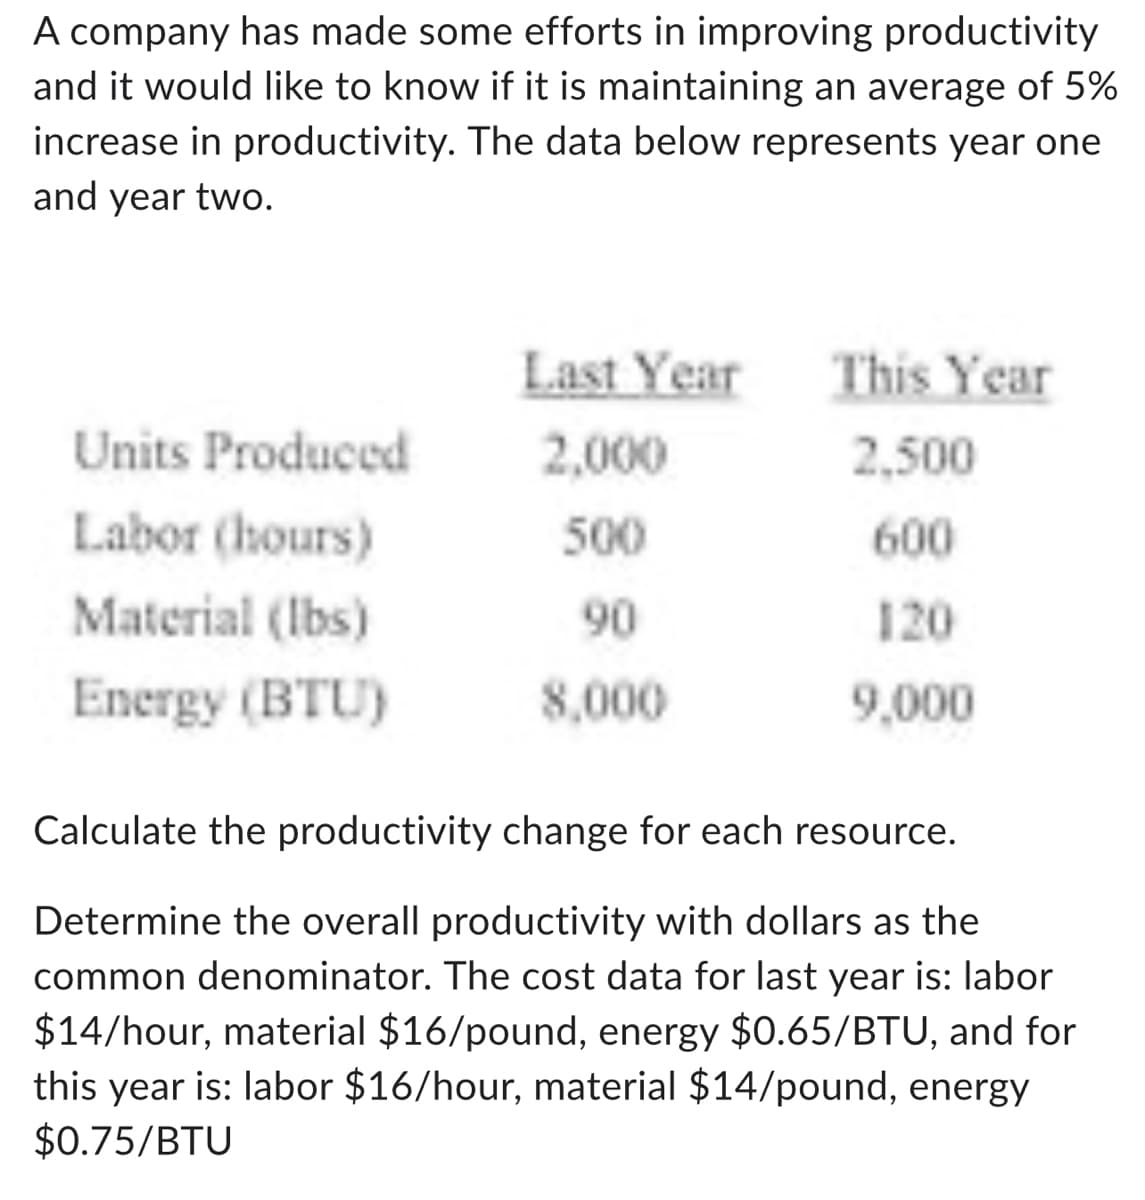 A company has made some efforts in improving productivity
and it would like to know if it is maintaining an average of 5%
increase in productivity. The data below represents year one
and year two.
Units Produced
Labor (hours)
Material (lbs)
Energy (BTU)
Last Year
2,000
500
90
8,000
This Year
2,500
600
120
9,000
Calculate the productivity change for each resource.
Determine the overall productivity with dollars
common denominator. The cost data for last year is: labor
$14/hour, material $16/pound, energy $0.65/BTU, and for
this year is: labor $16/hour, material $14/pound, energy
$0.75/BTU